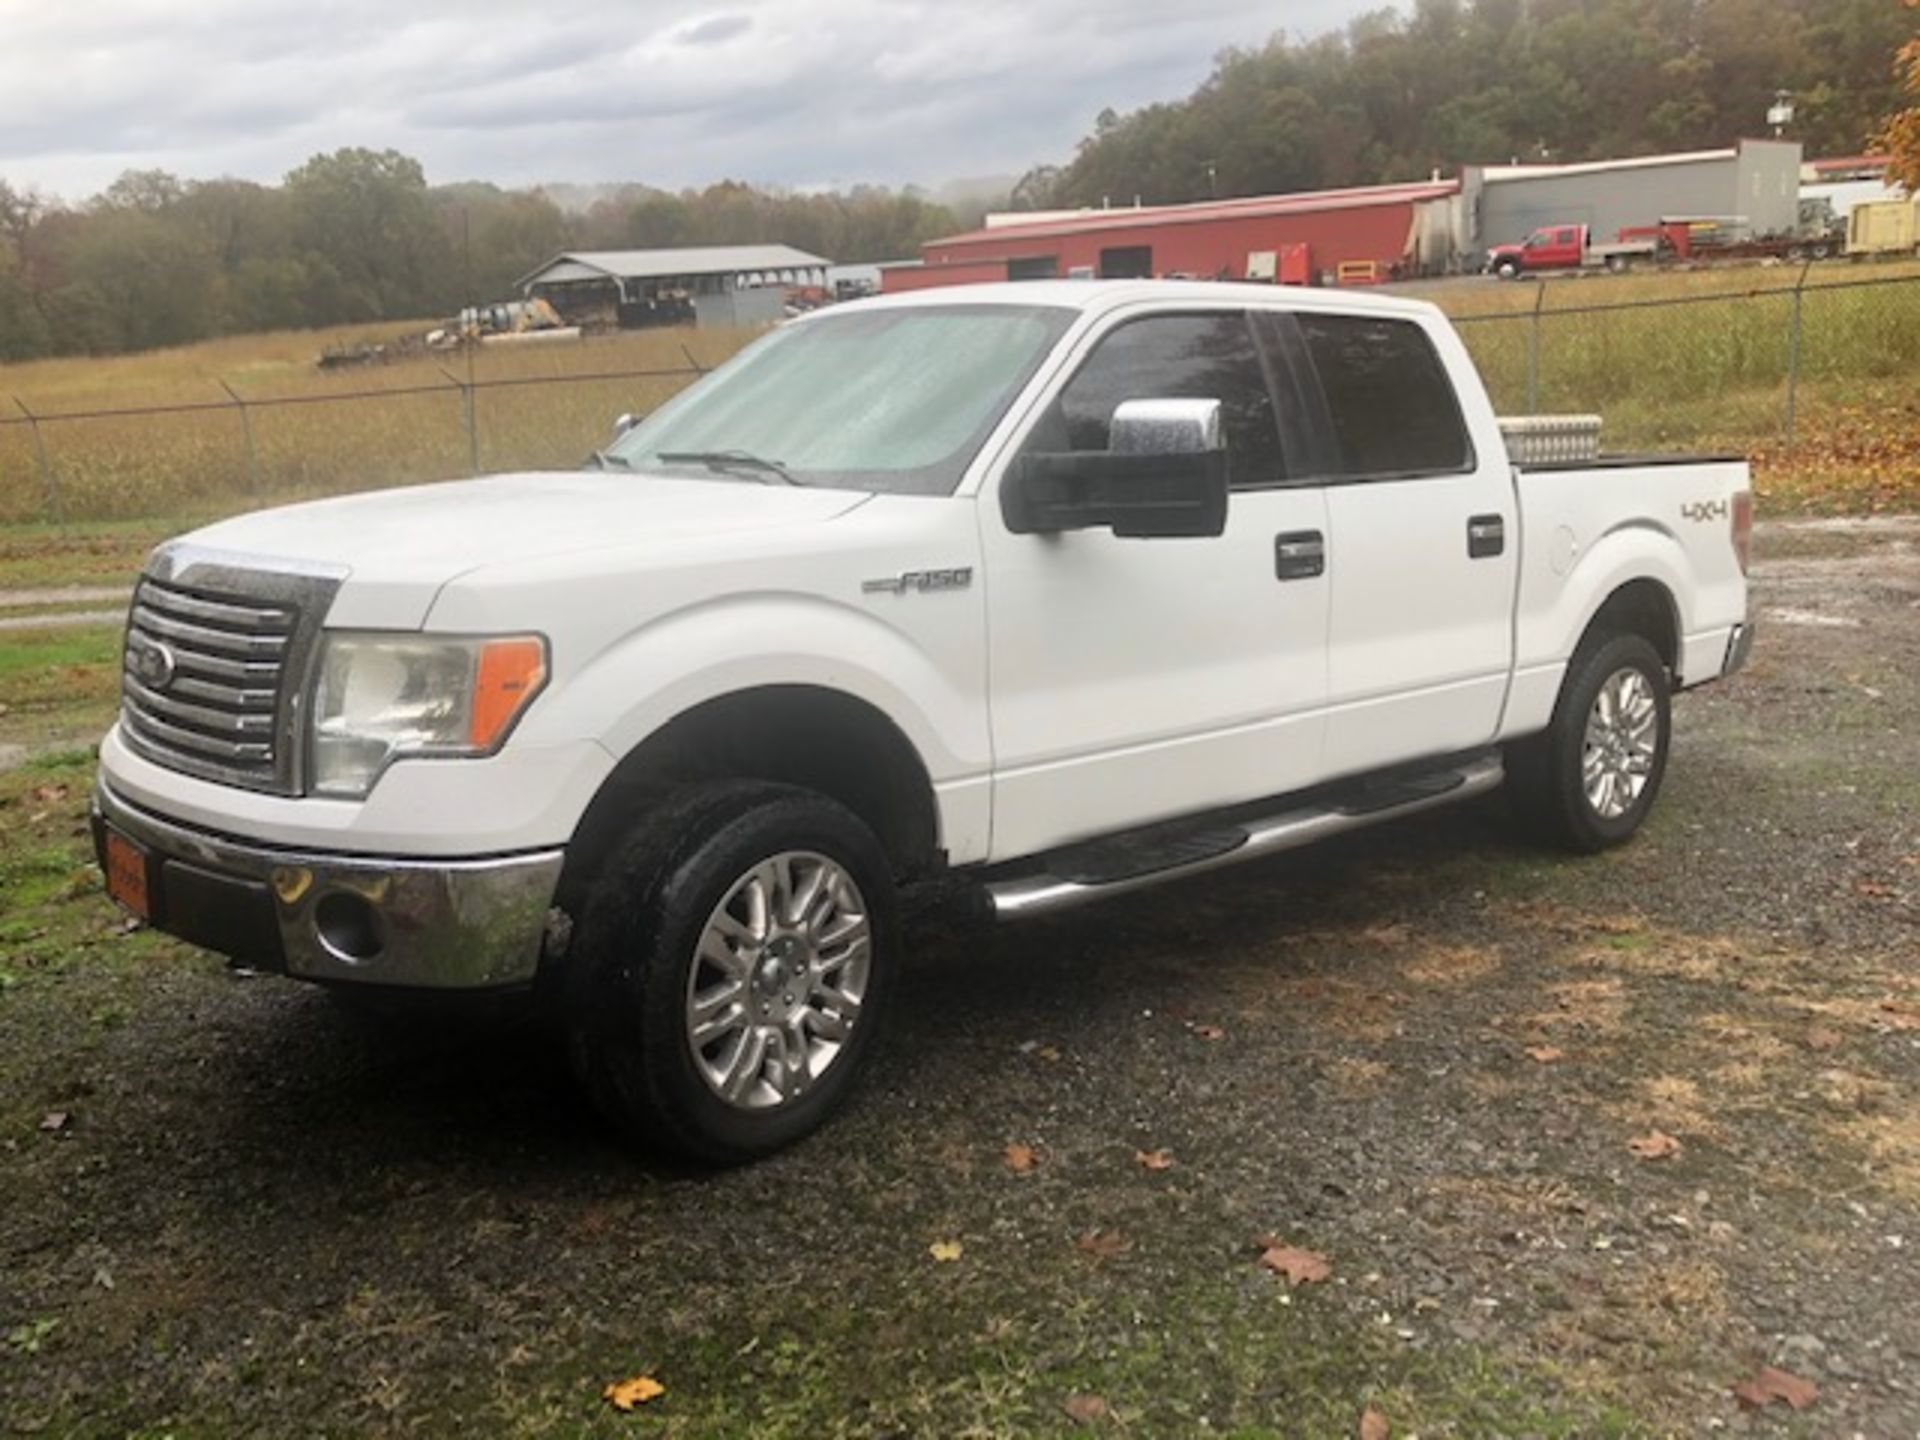 2010 Ford F150 XLT, 4WD, V-8, Automatic, 202,000 Miles - 14 Day Title Delay